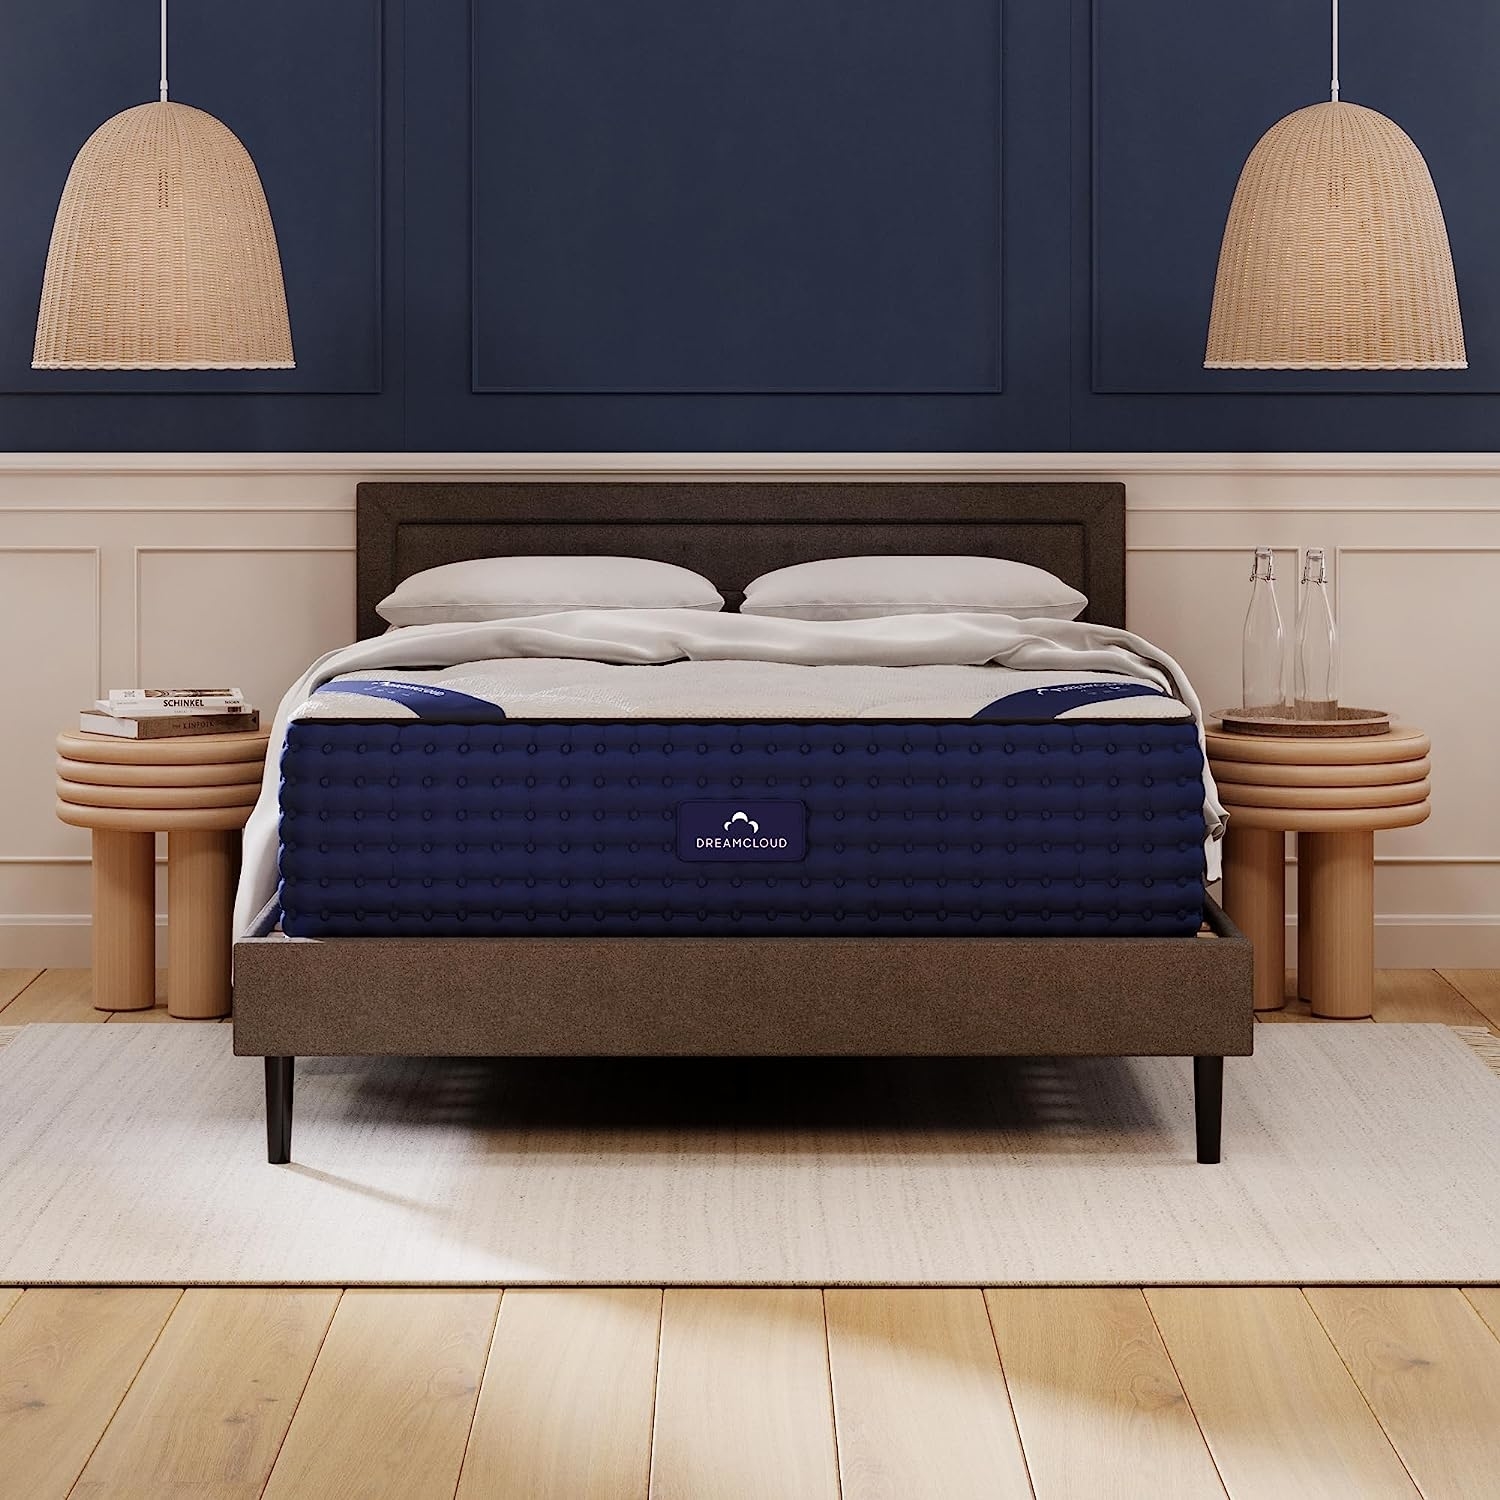 A DreamCloud mattress on a bed frame in a bedroom setting, flanked by bedside tables and lamps